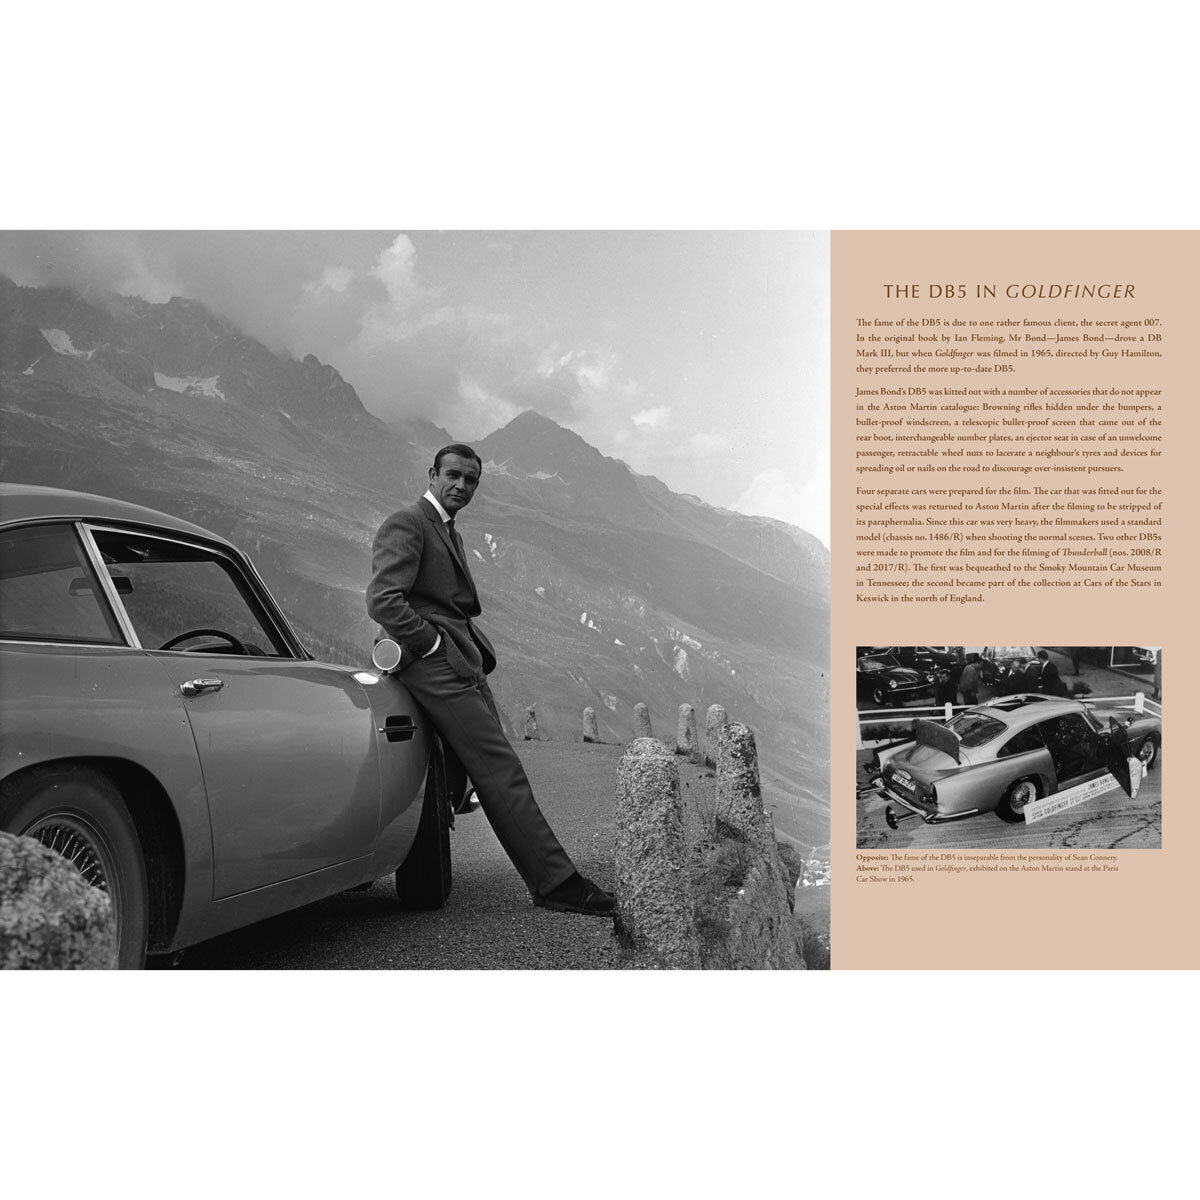 Page spread describing the DB5 in Goldfinger with image of Sean Connery